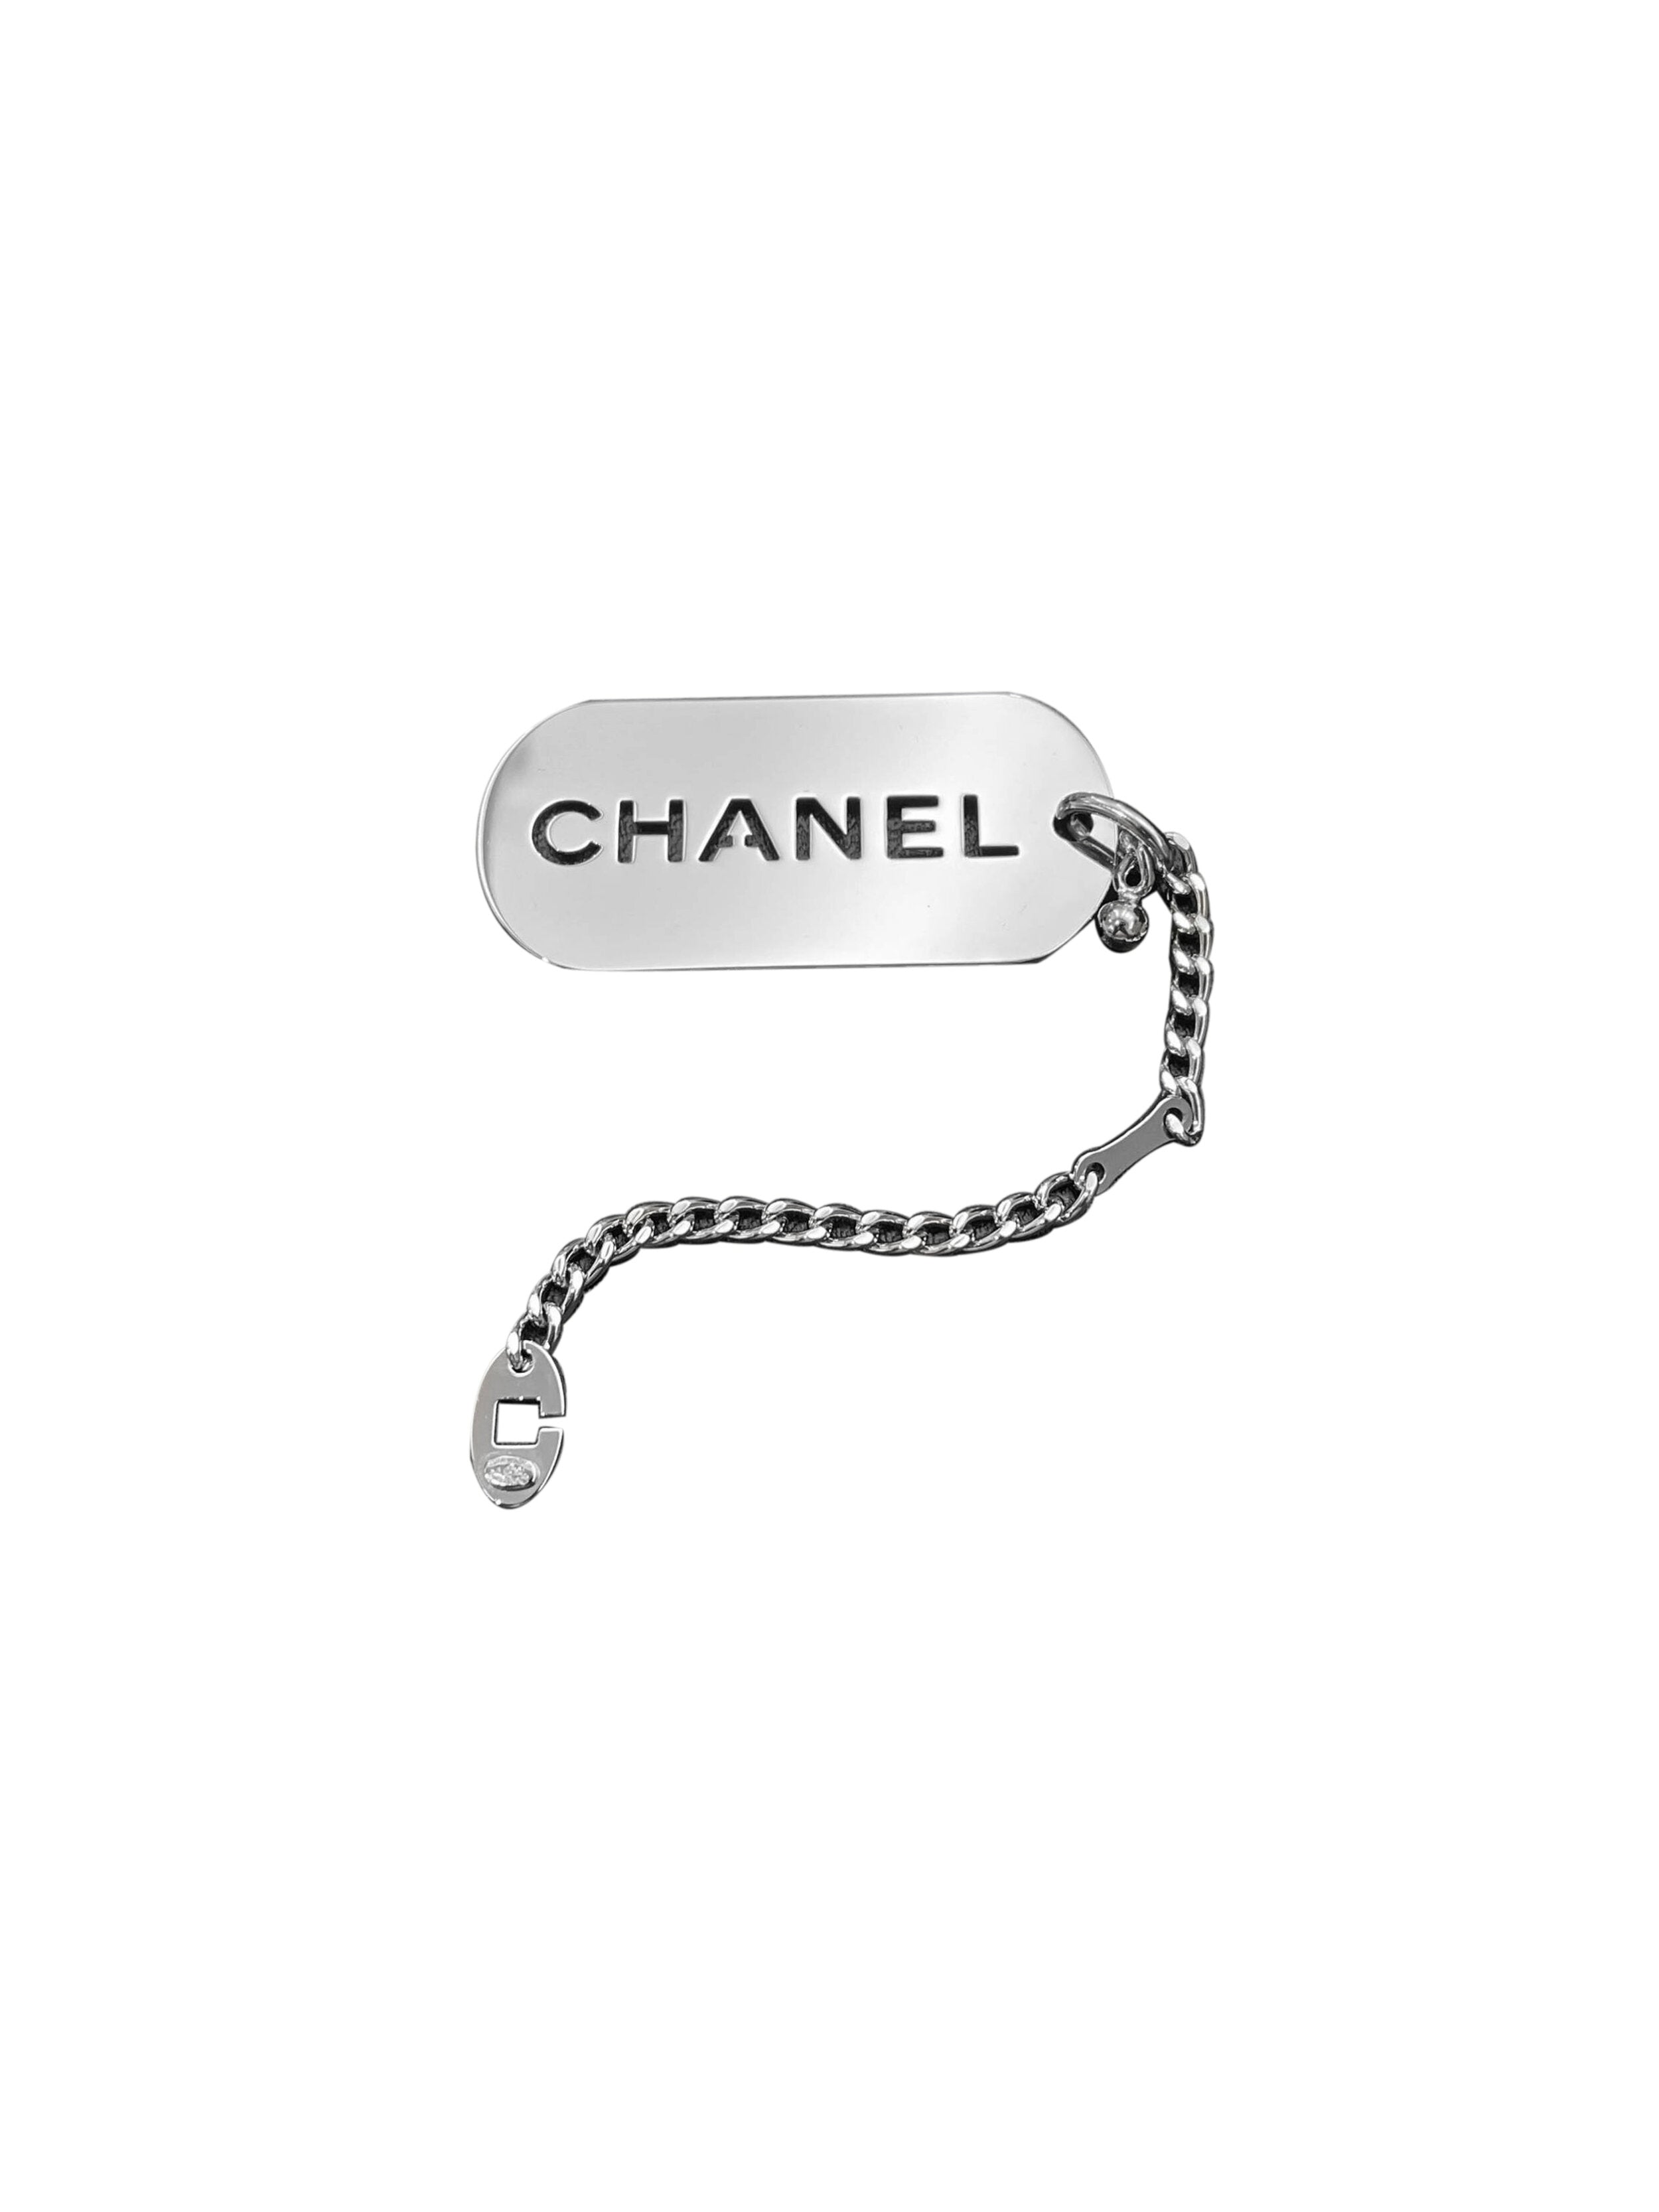 Pre-Owned Chanel CHANEL photo case key ring charm here mark red system x  silver leather metal material (Good) 